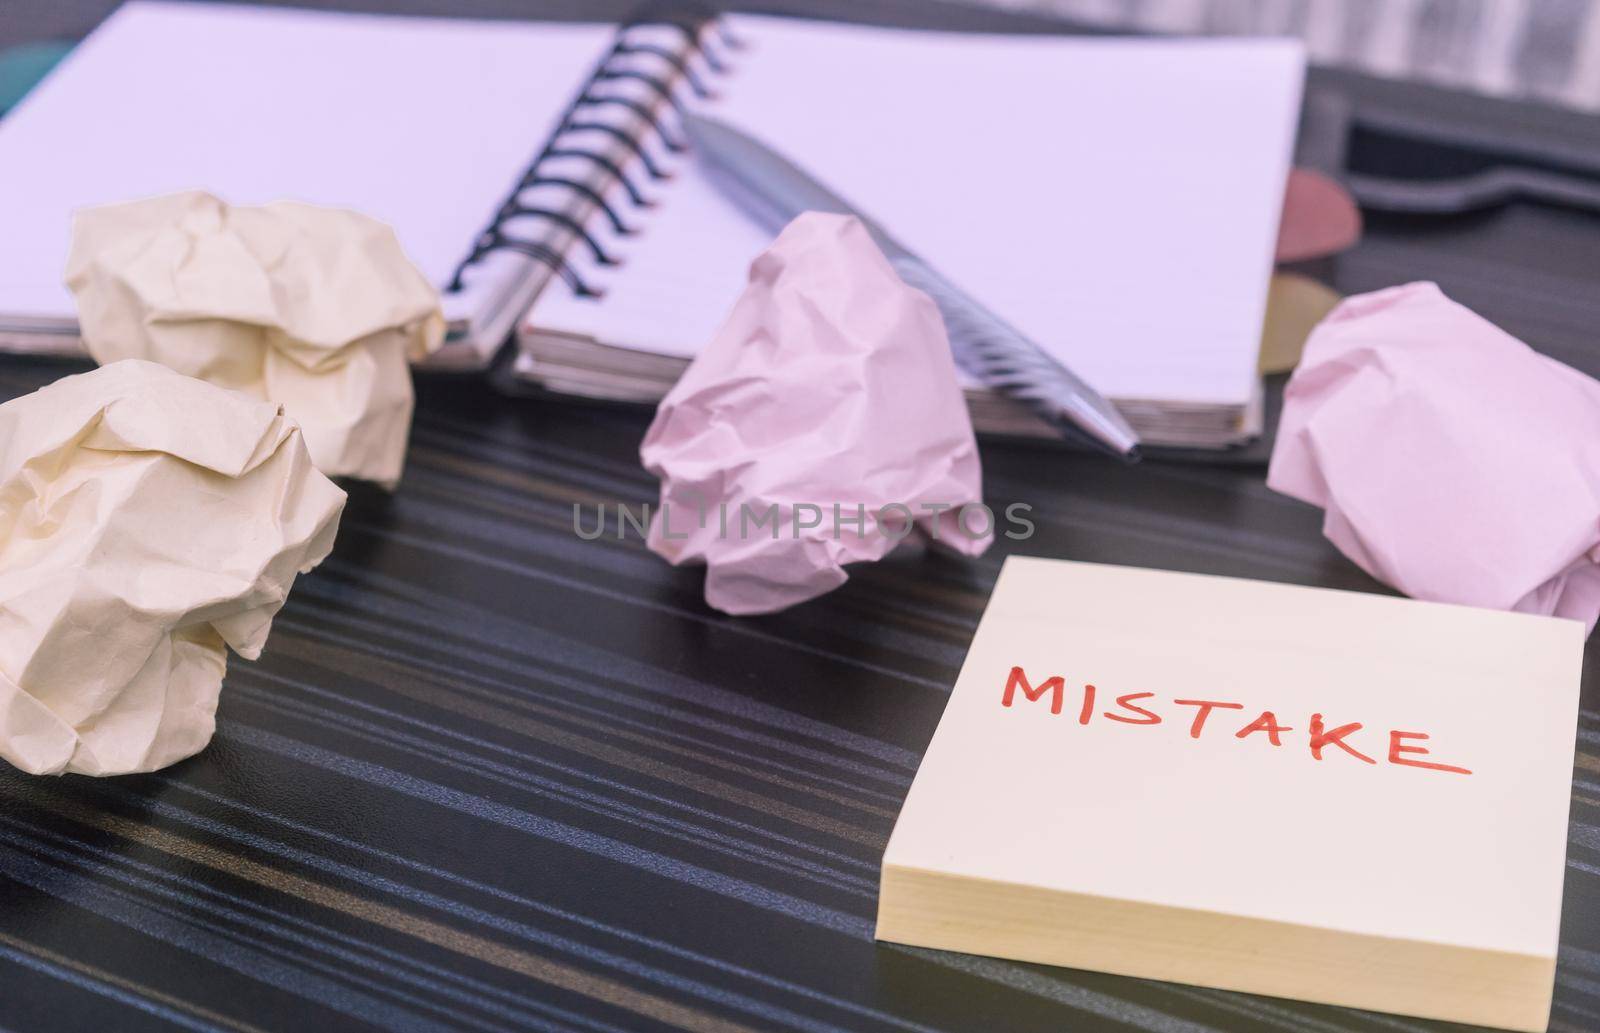 Mistake written on sticky notes. Learning, wrong, blooper, error message, regret sayings background. Fault, defect, careless, lesson correction and reconciliation concept for business finance industry